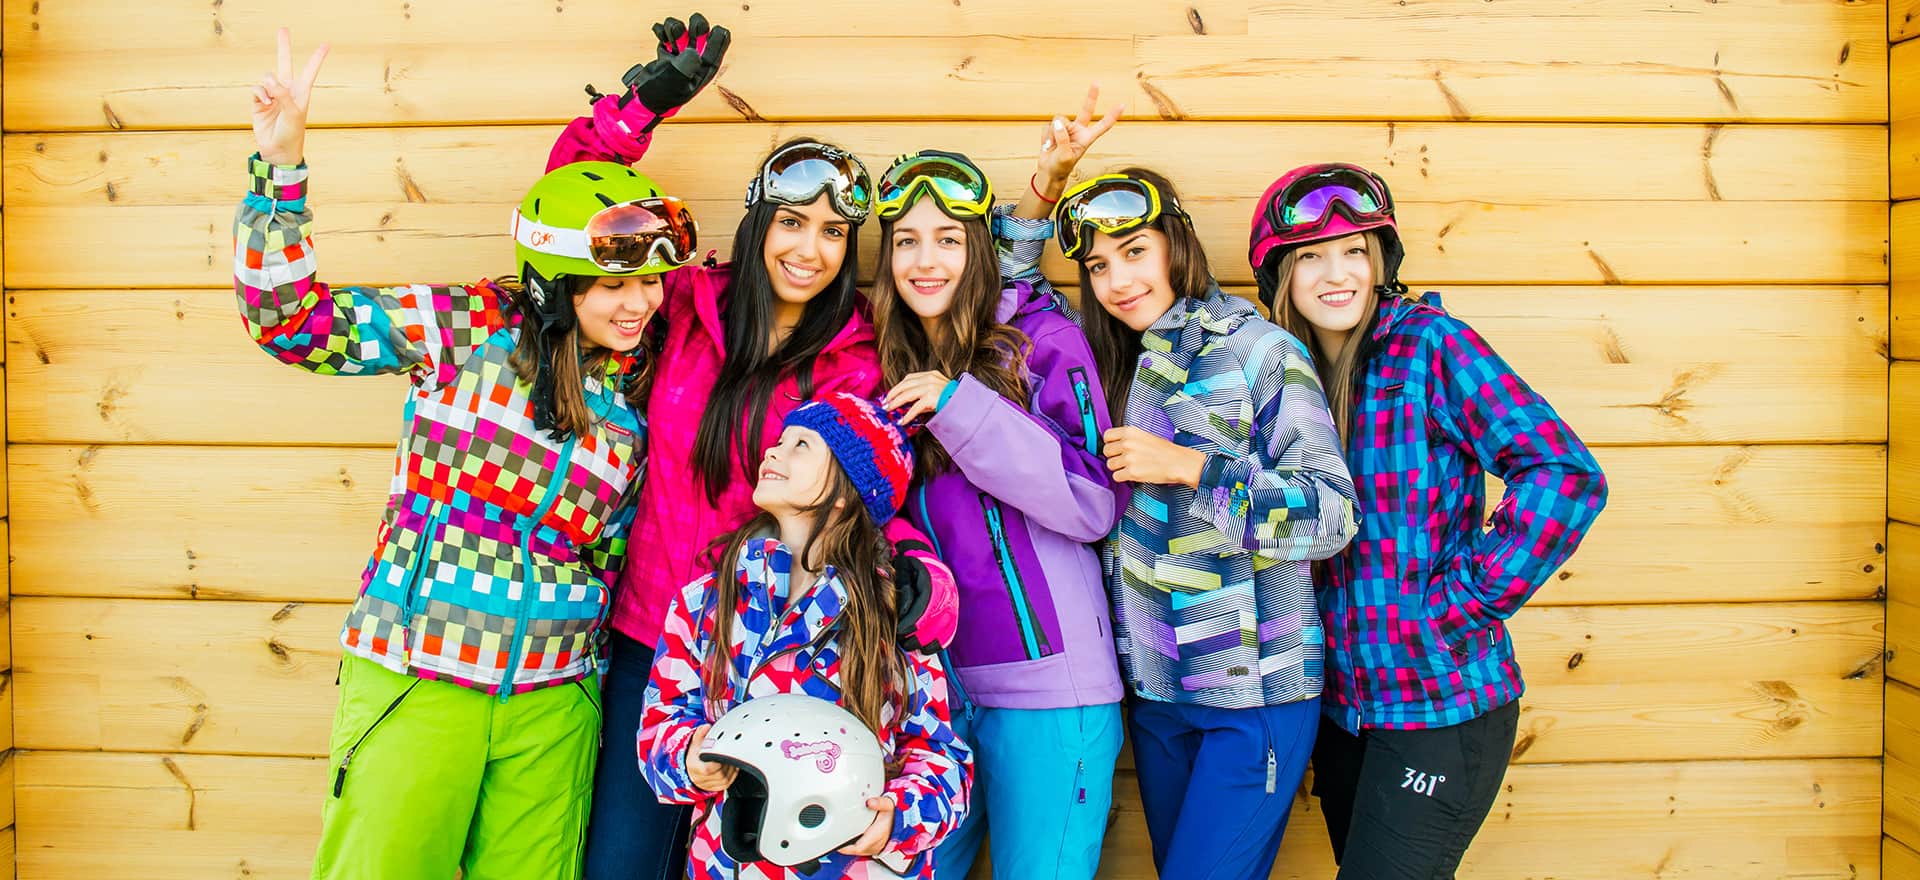 Models equipped with ski clothes & accessories from Tsakiris.